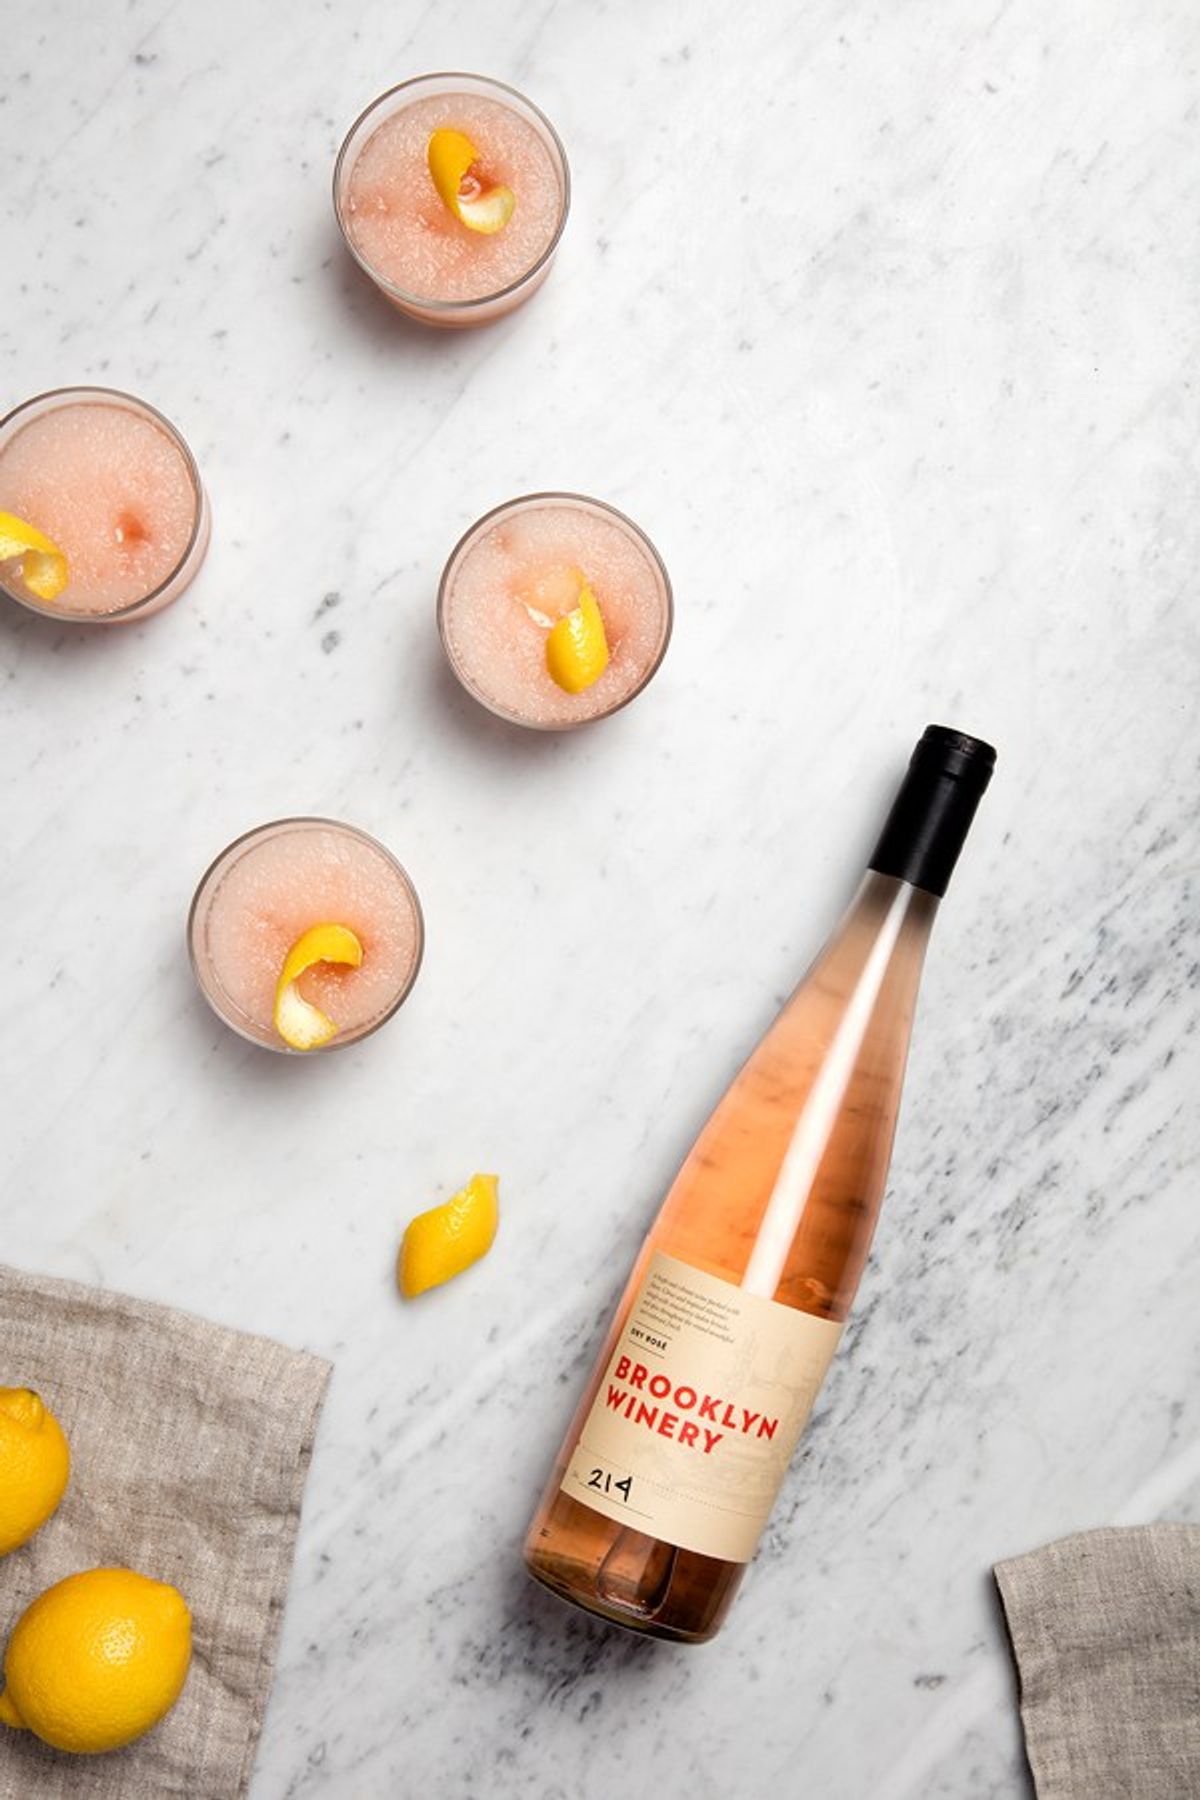 The "Frosé" Is The Drink That Dreams Are Made Of